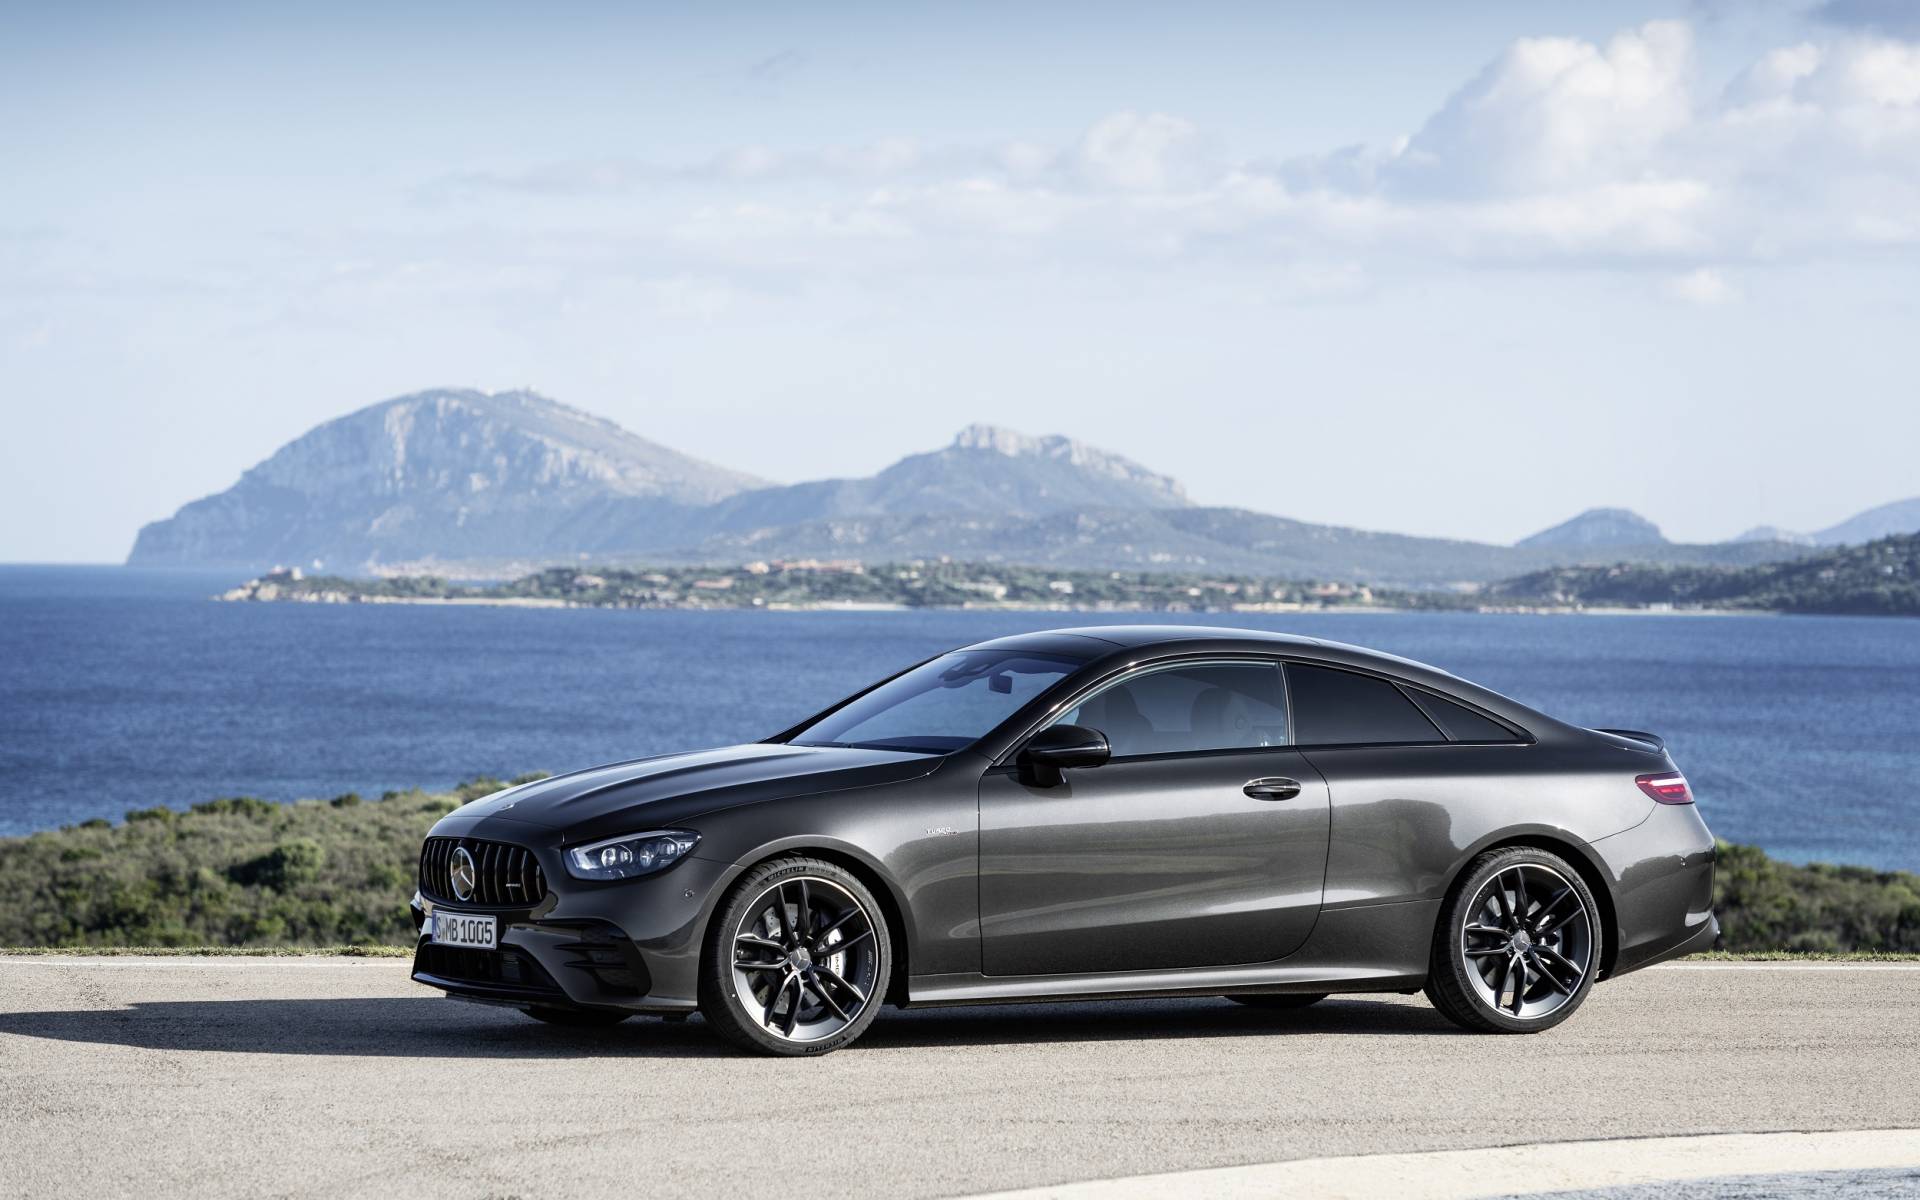 21 Mercedes Benz E Class Coupe And Cabriolet Arrive This Summer The Car Guide